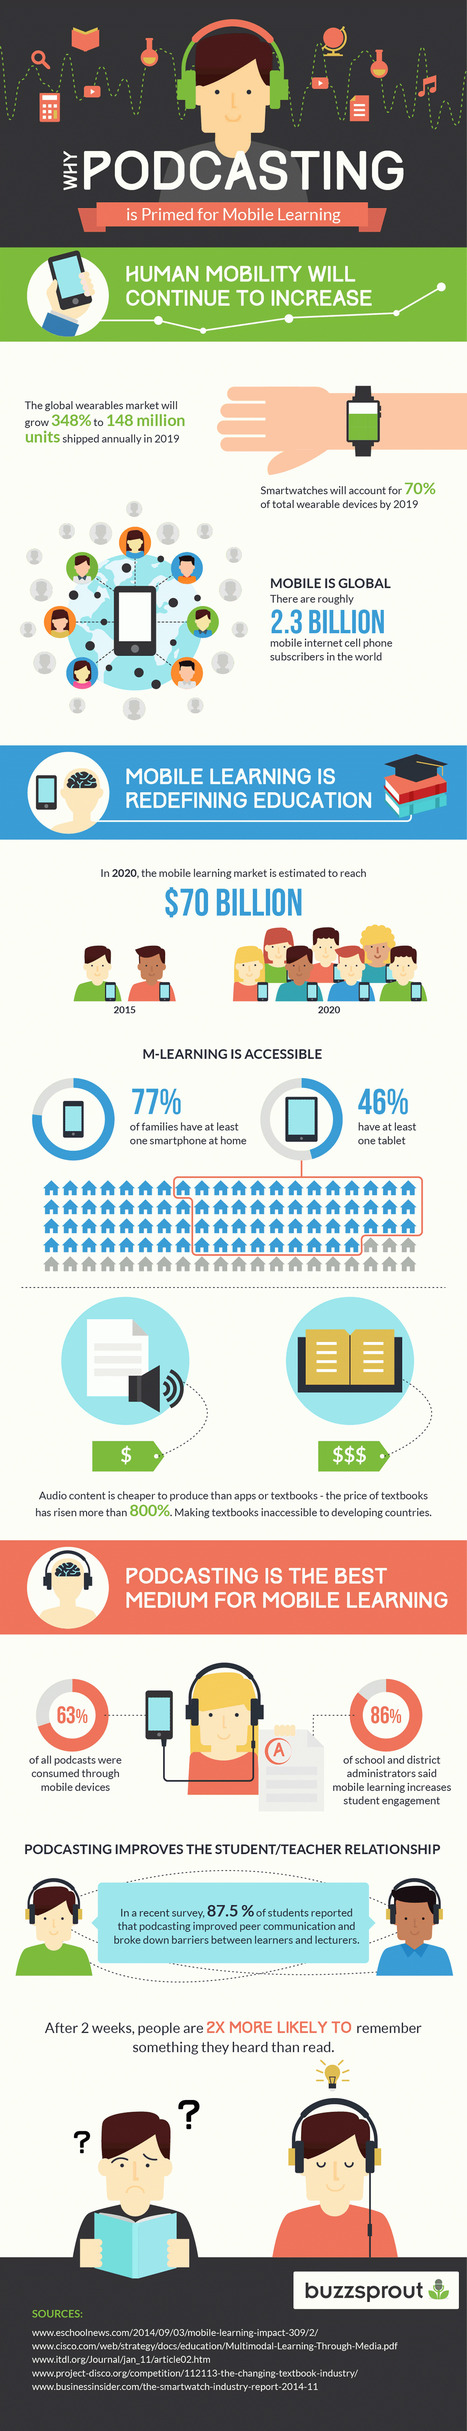 Why Podcasting is Primed For Mobile Learning Infographic | E-Learning-Inclusivo (Mashup) | Scoop.it